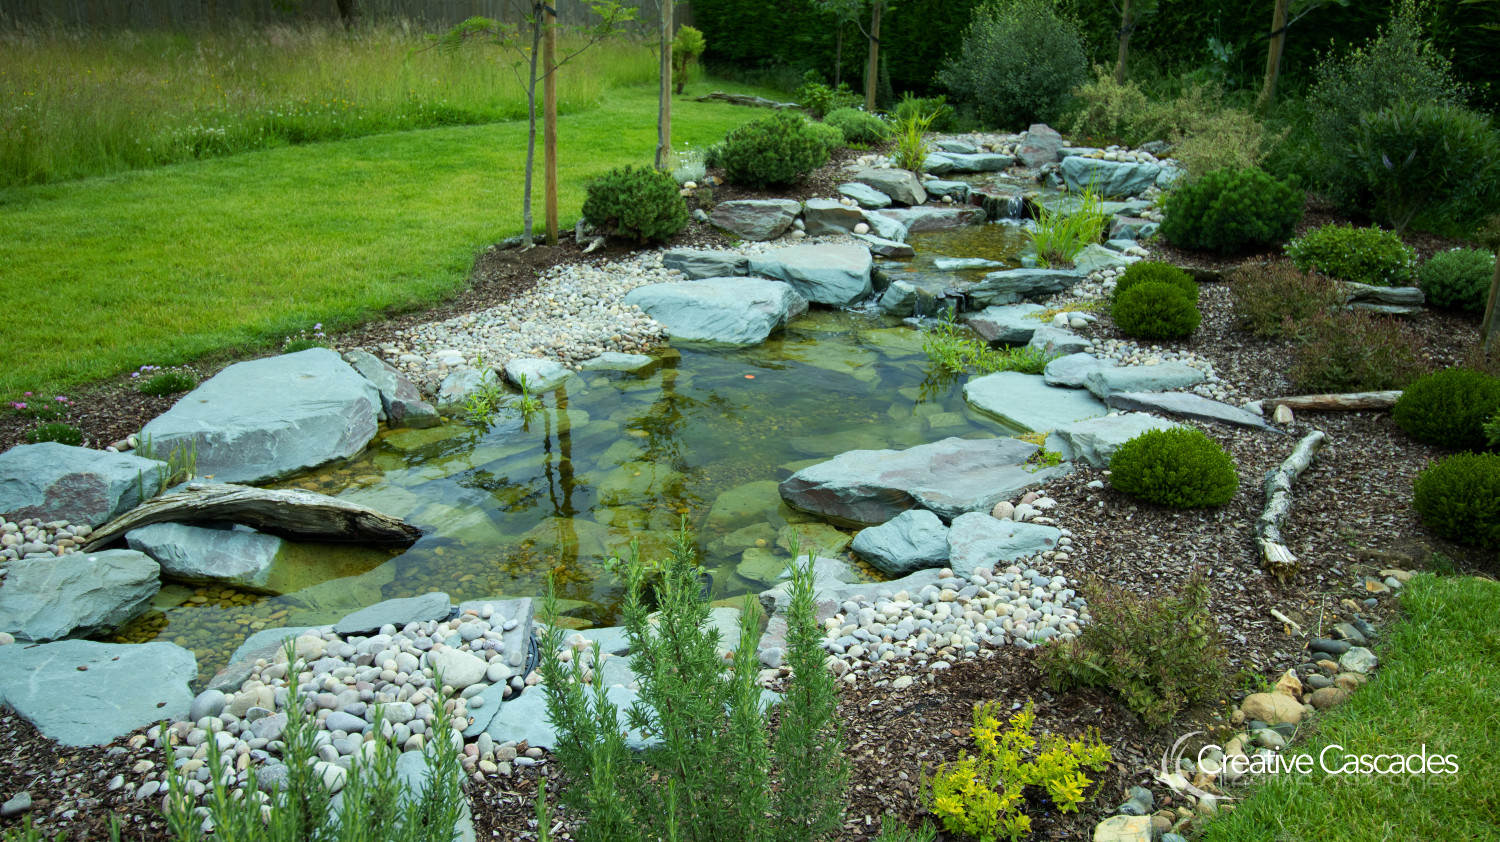 Blue slate used in this wildlife pond, plants beginning to soften the rocky appearance. You may prefer smaller rocks and more soil, the choices are infinite.  - Landscaping and Water Features -  Creative Cascades